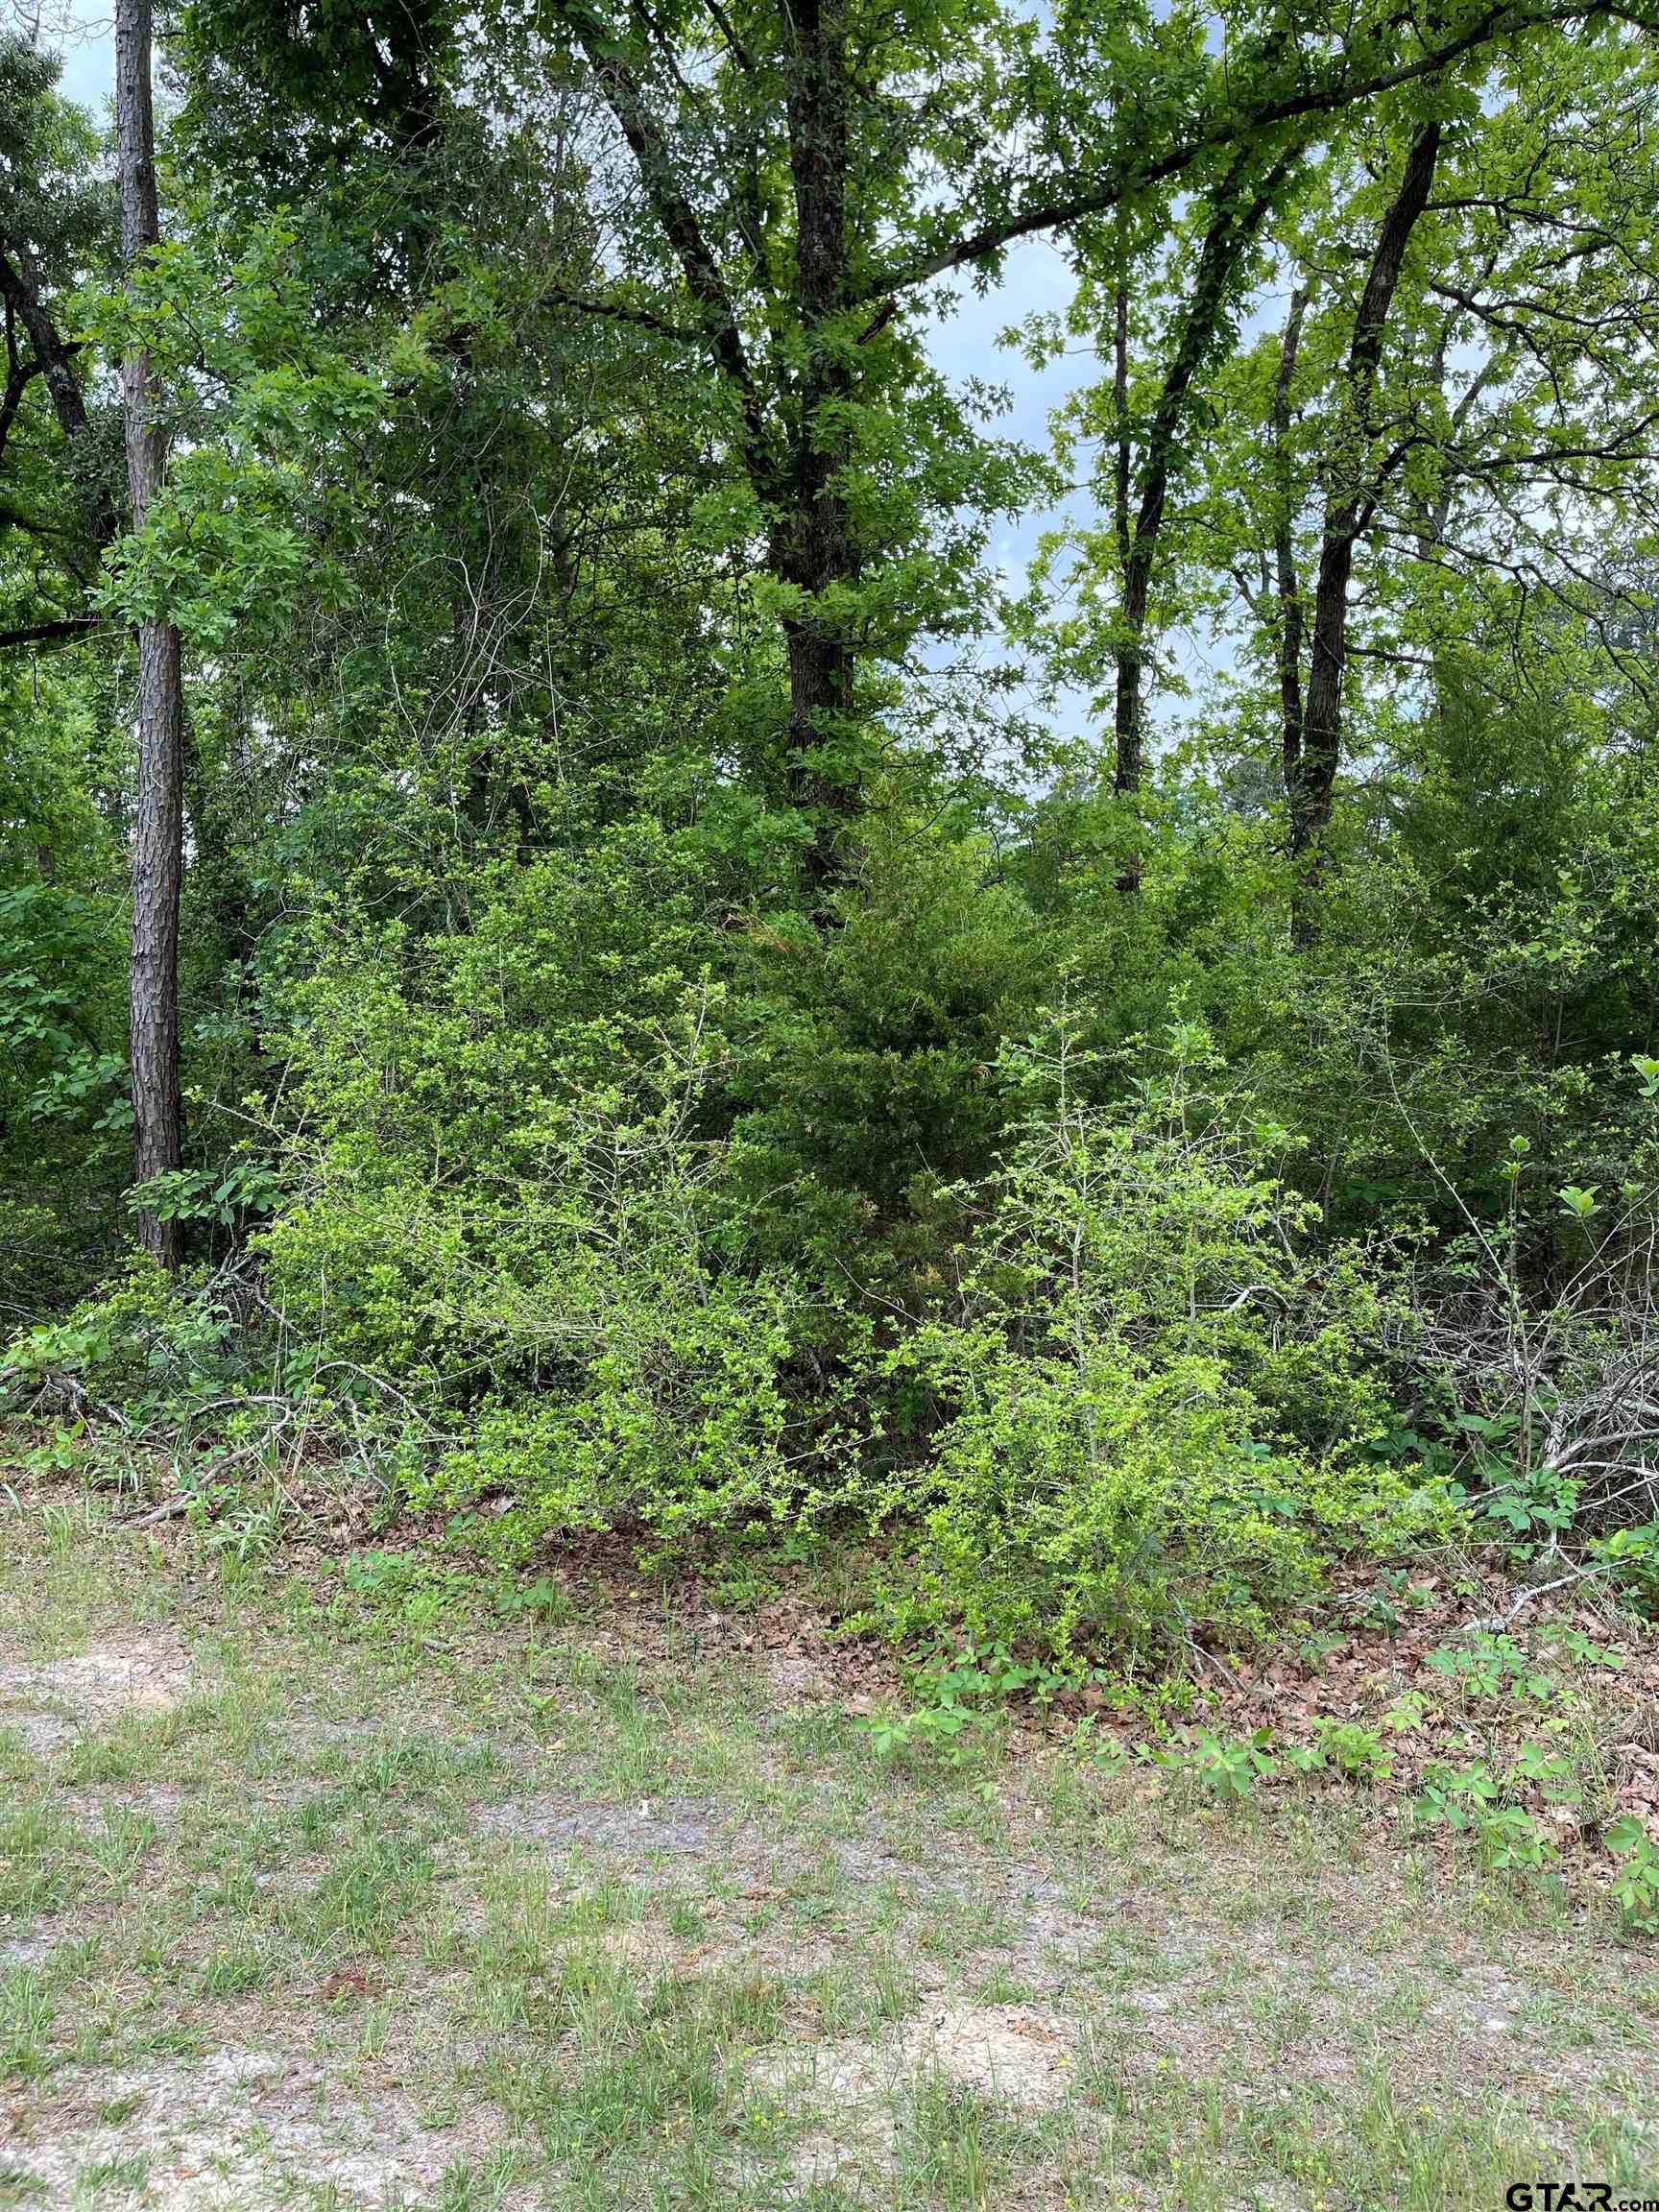 Two wooded lots located in Sec 3 of the gated community of Holly Lake Ranch.  This secluded section has a pool but residents are able to enjoy all the amenities provided by Holly Lake Ranch such as fishing, pickleball and tennis, hiking trails, fitness center and much, much more.